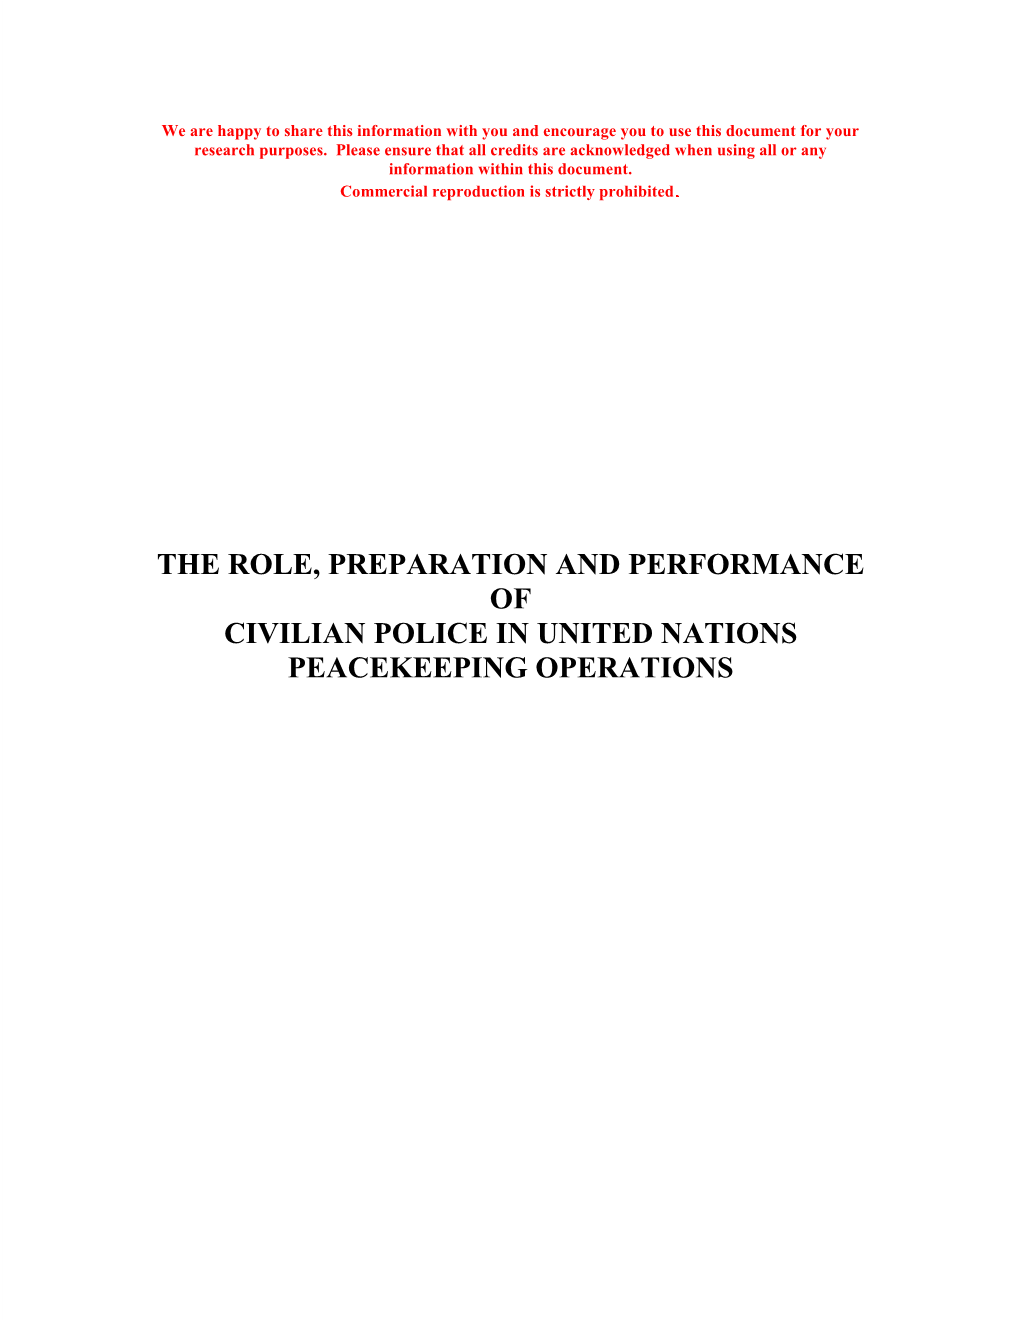 The Role, Preparation and Performance of Civilian